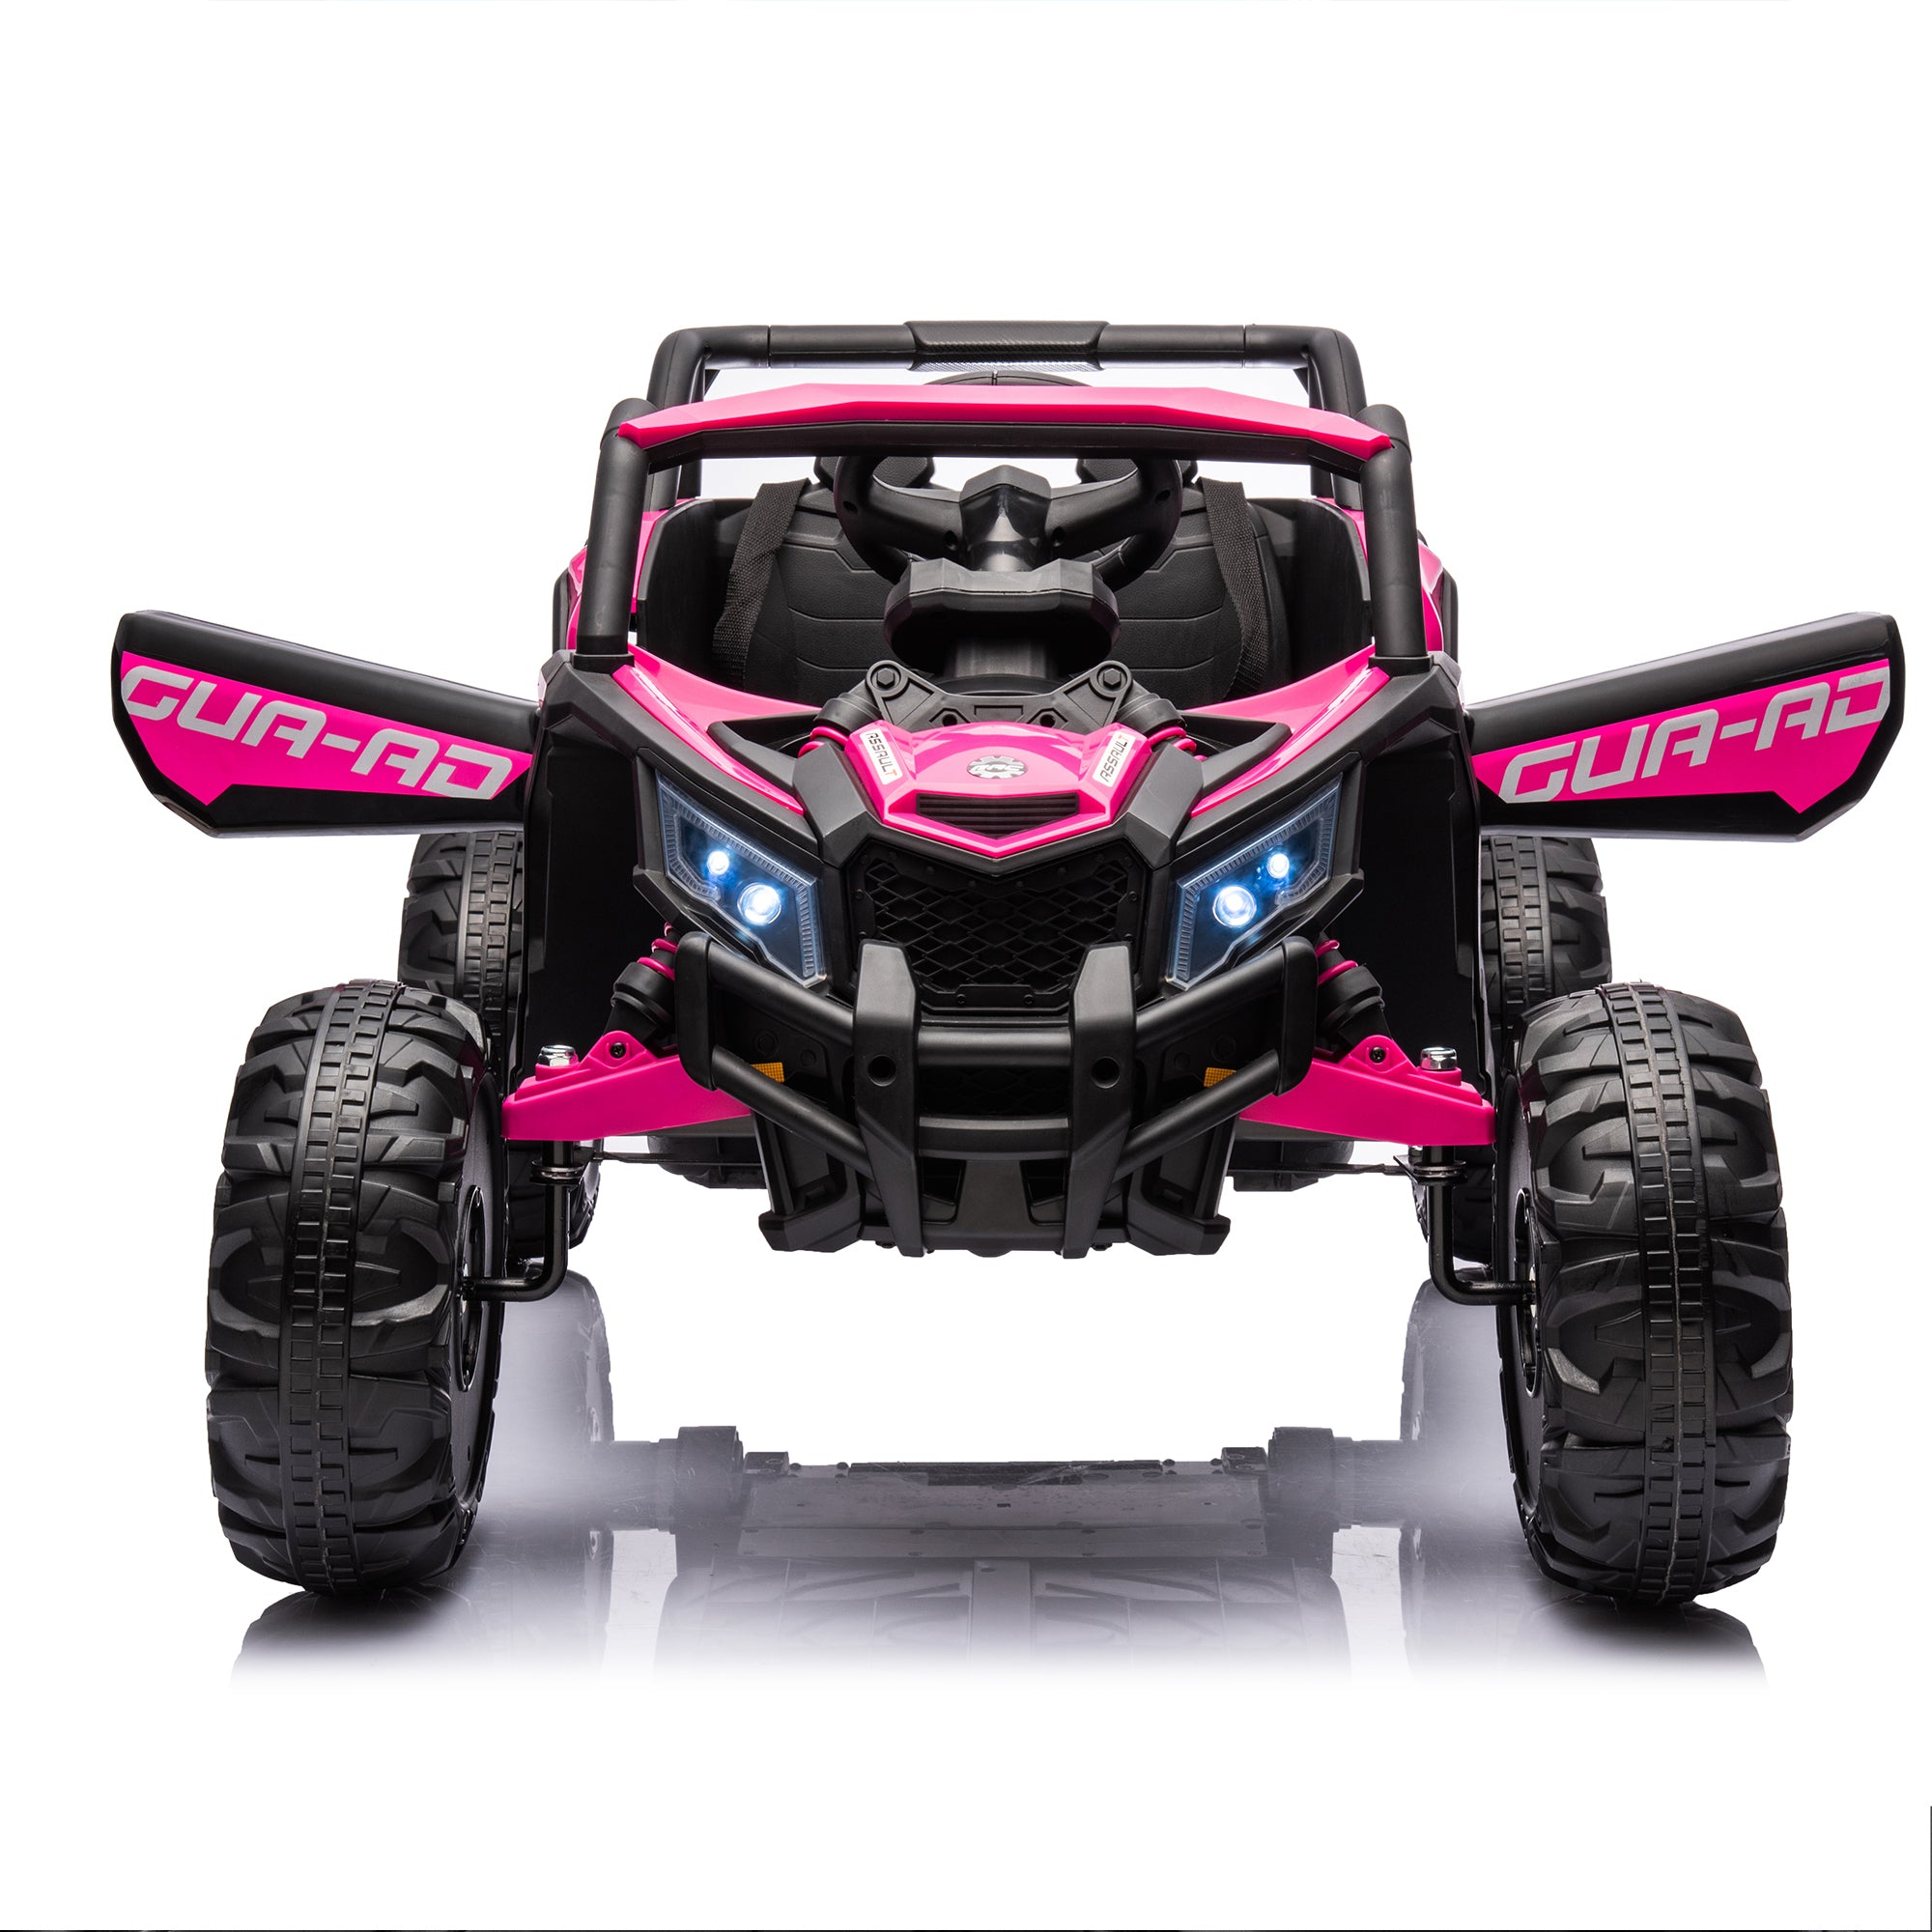 🆓🚛 12V Ride On Car With Remote Control, UTV Ride On for Kid, 3-Point Safety Harness, Music Player (USB Port/Volume Knob/Battery Indicator), LED Lights, High-Low Speed Switch - Off-Road Adventure for Kids